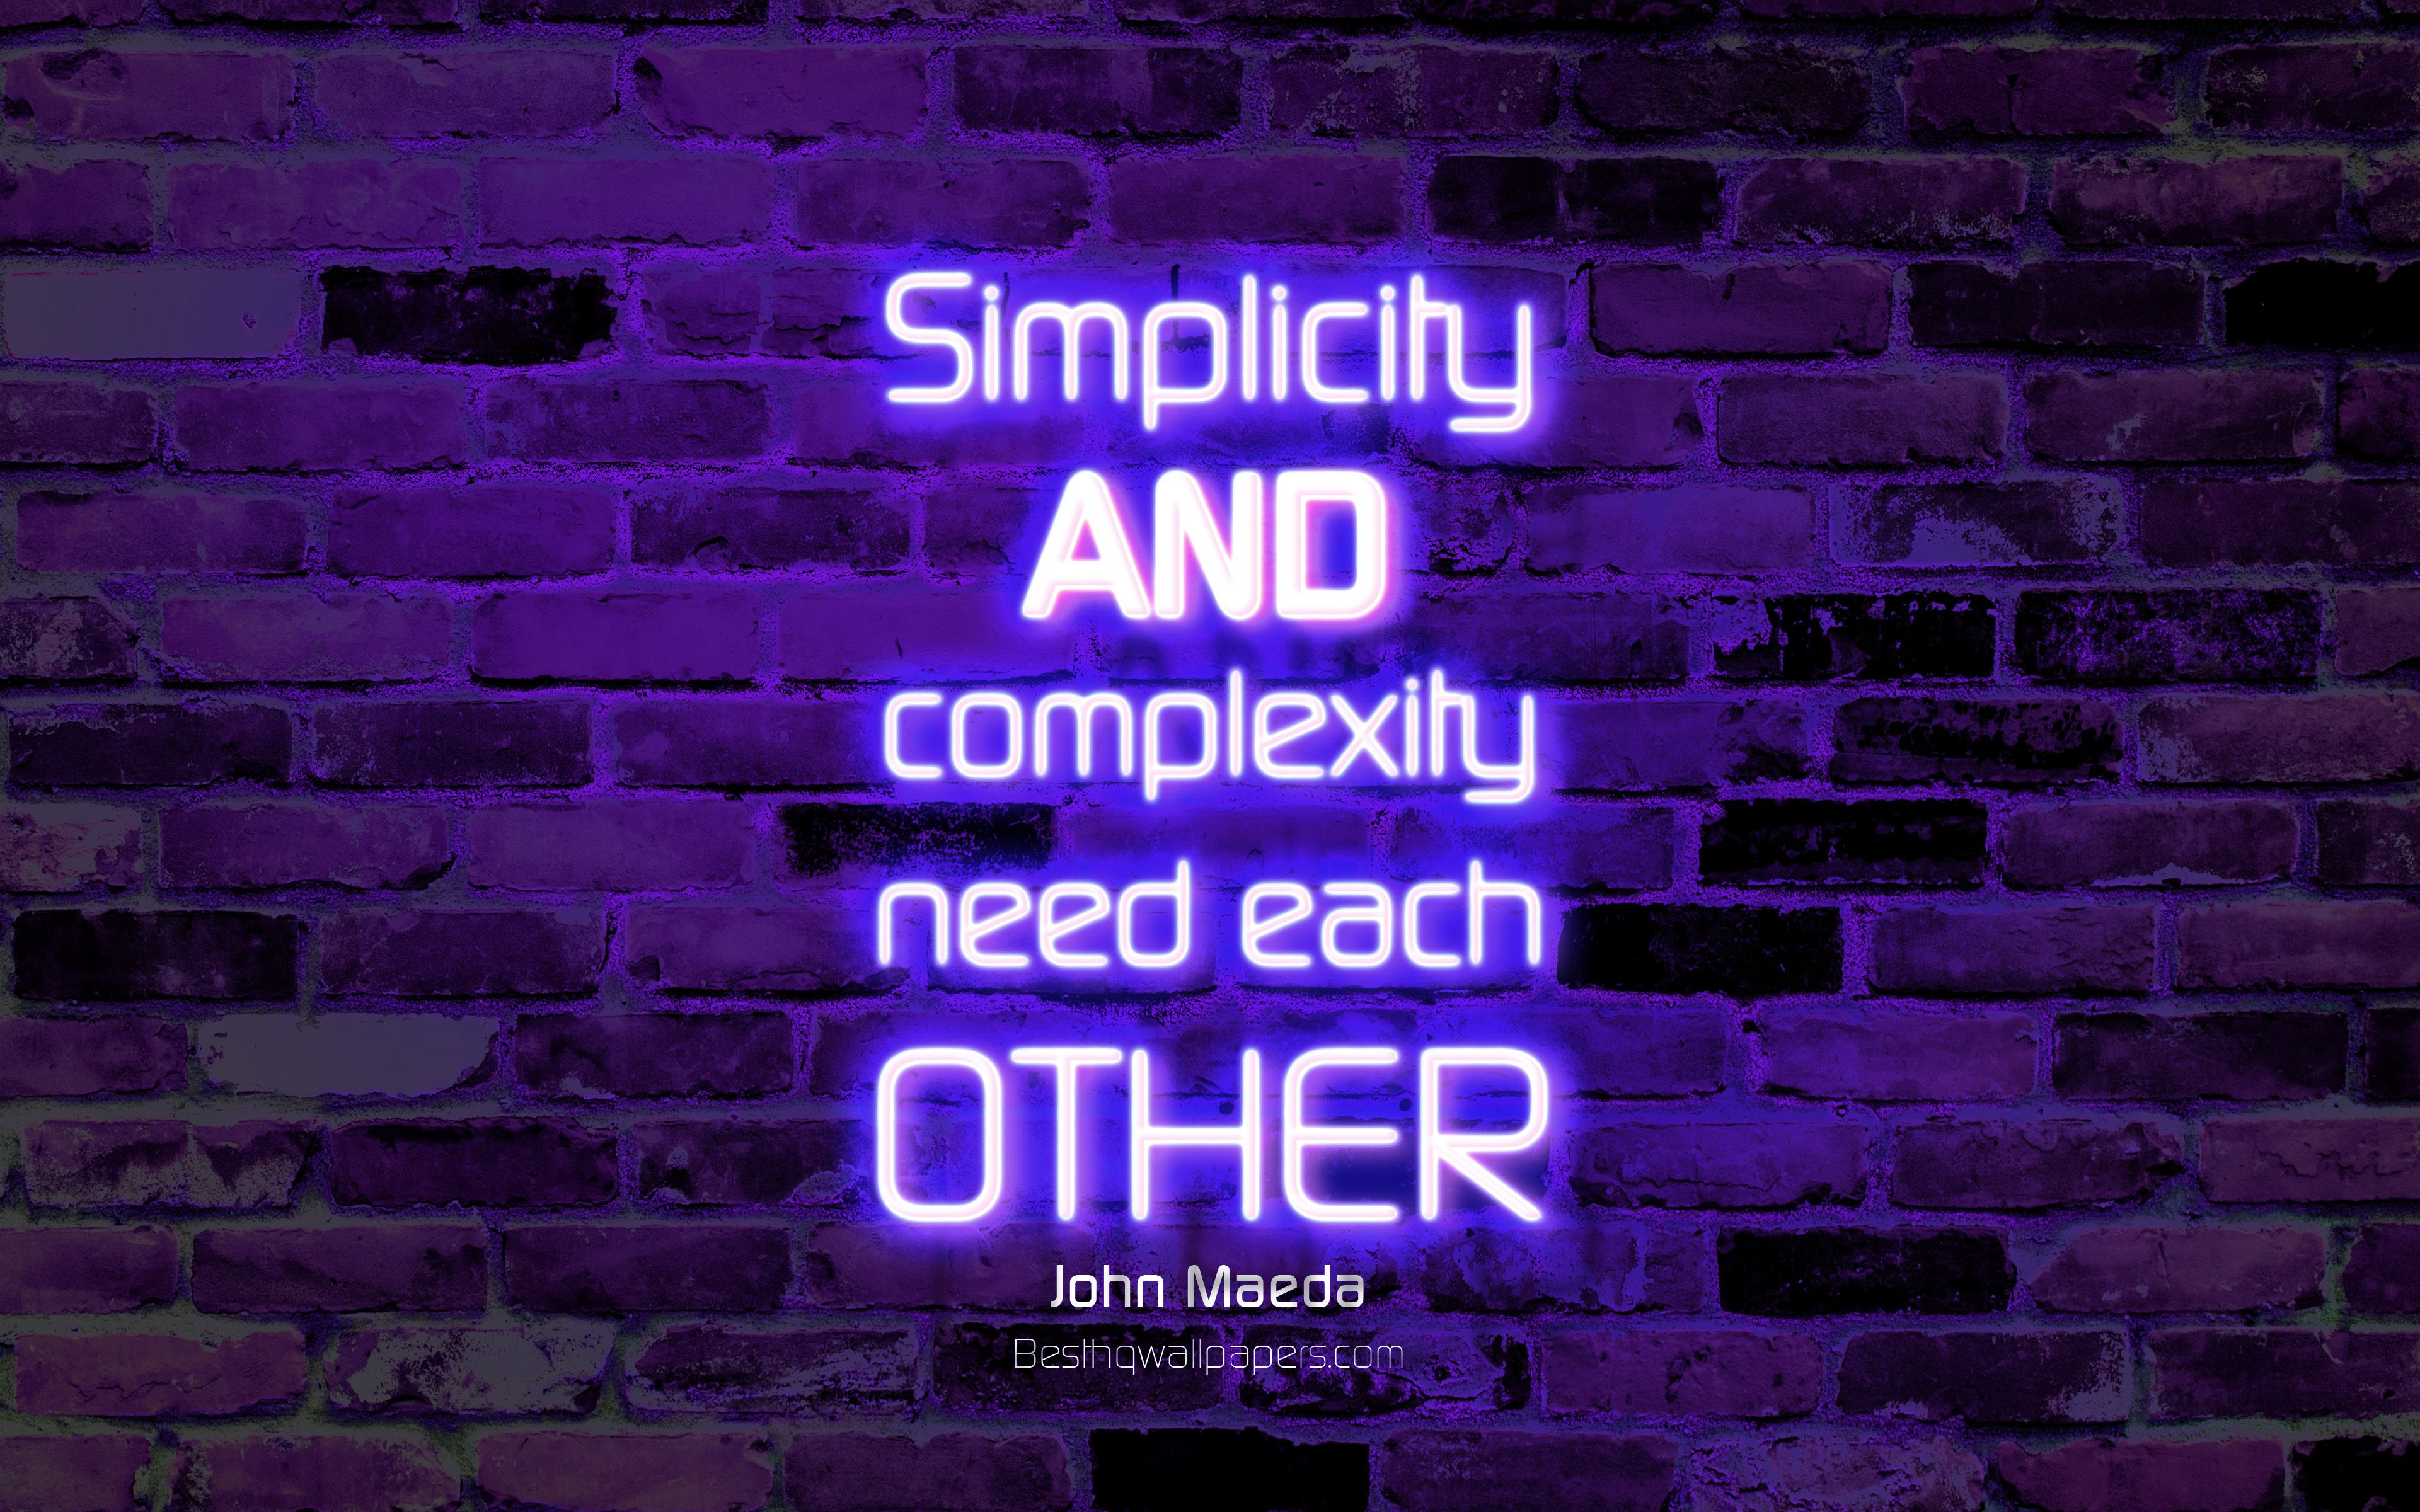 Download wallpaper Simplicity and complexity need each other, 4k, violet brick wall, John Maeda Quotes, popular quotes, neon text, inspiration, John Maeda, quotes about life for desktop with resolution 3840x2400. High Quality